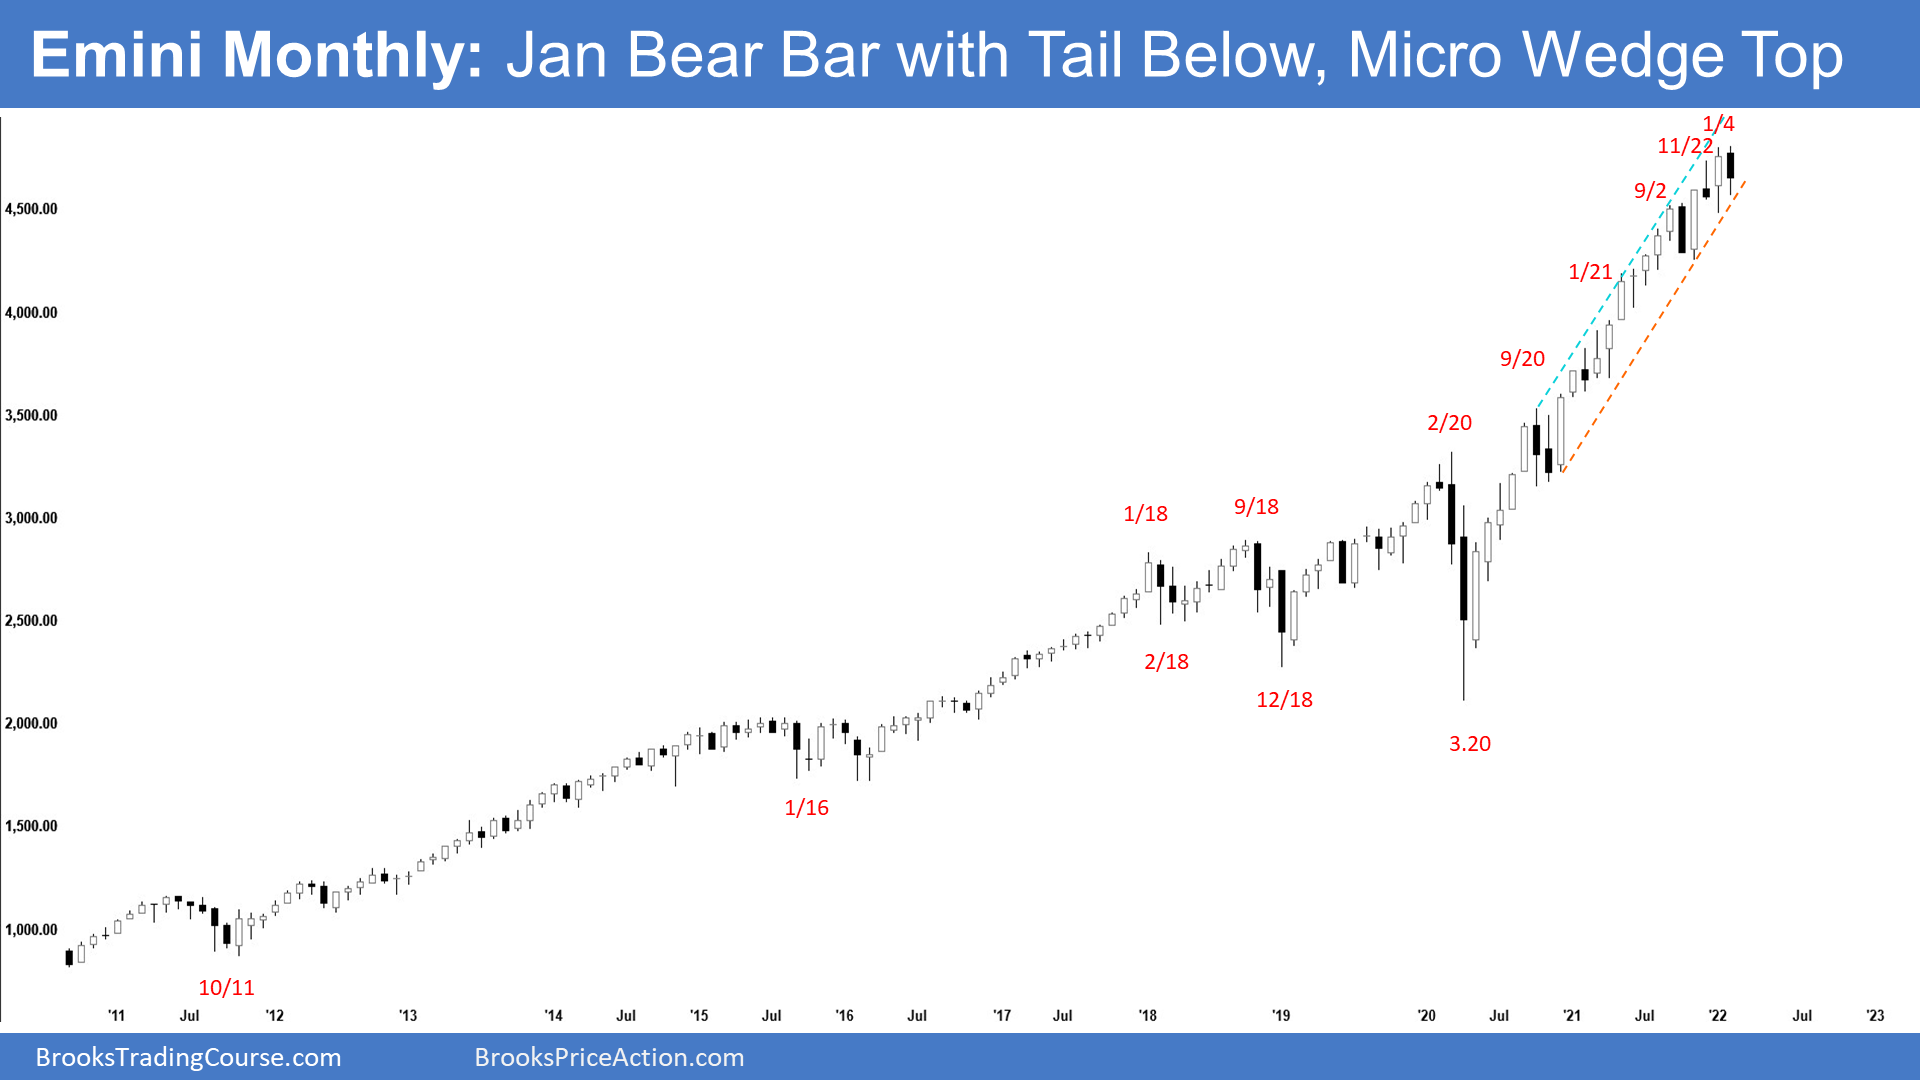 SP500 Emini Monthly Chart January Bear Bar with Tail Below, Micro Wedge Top